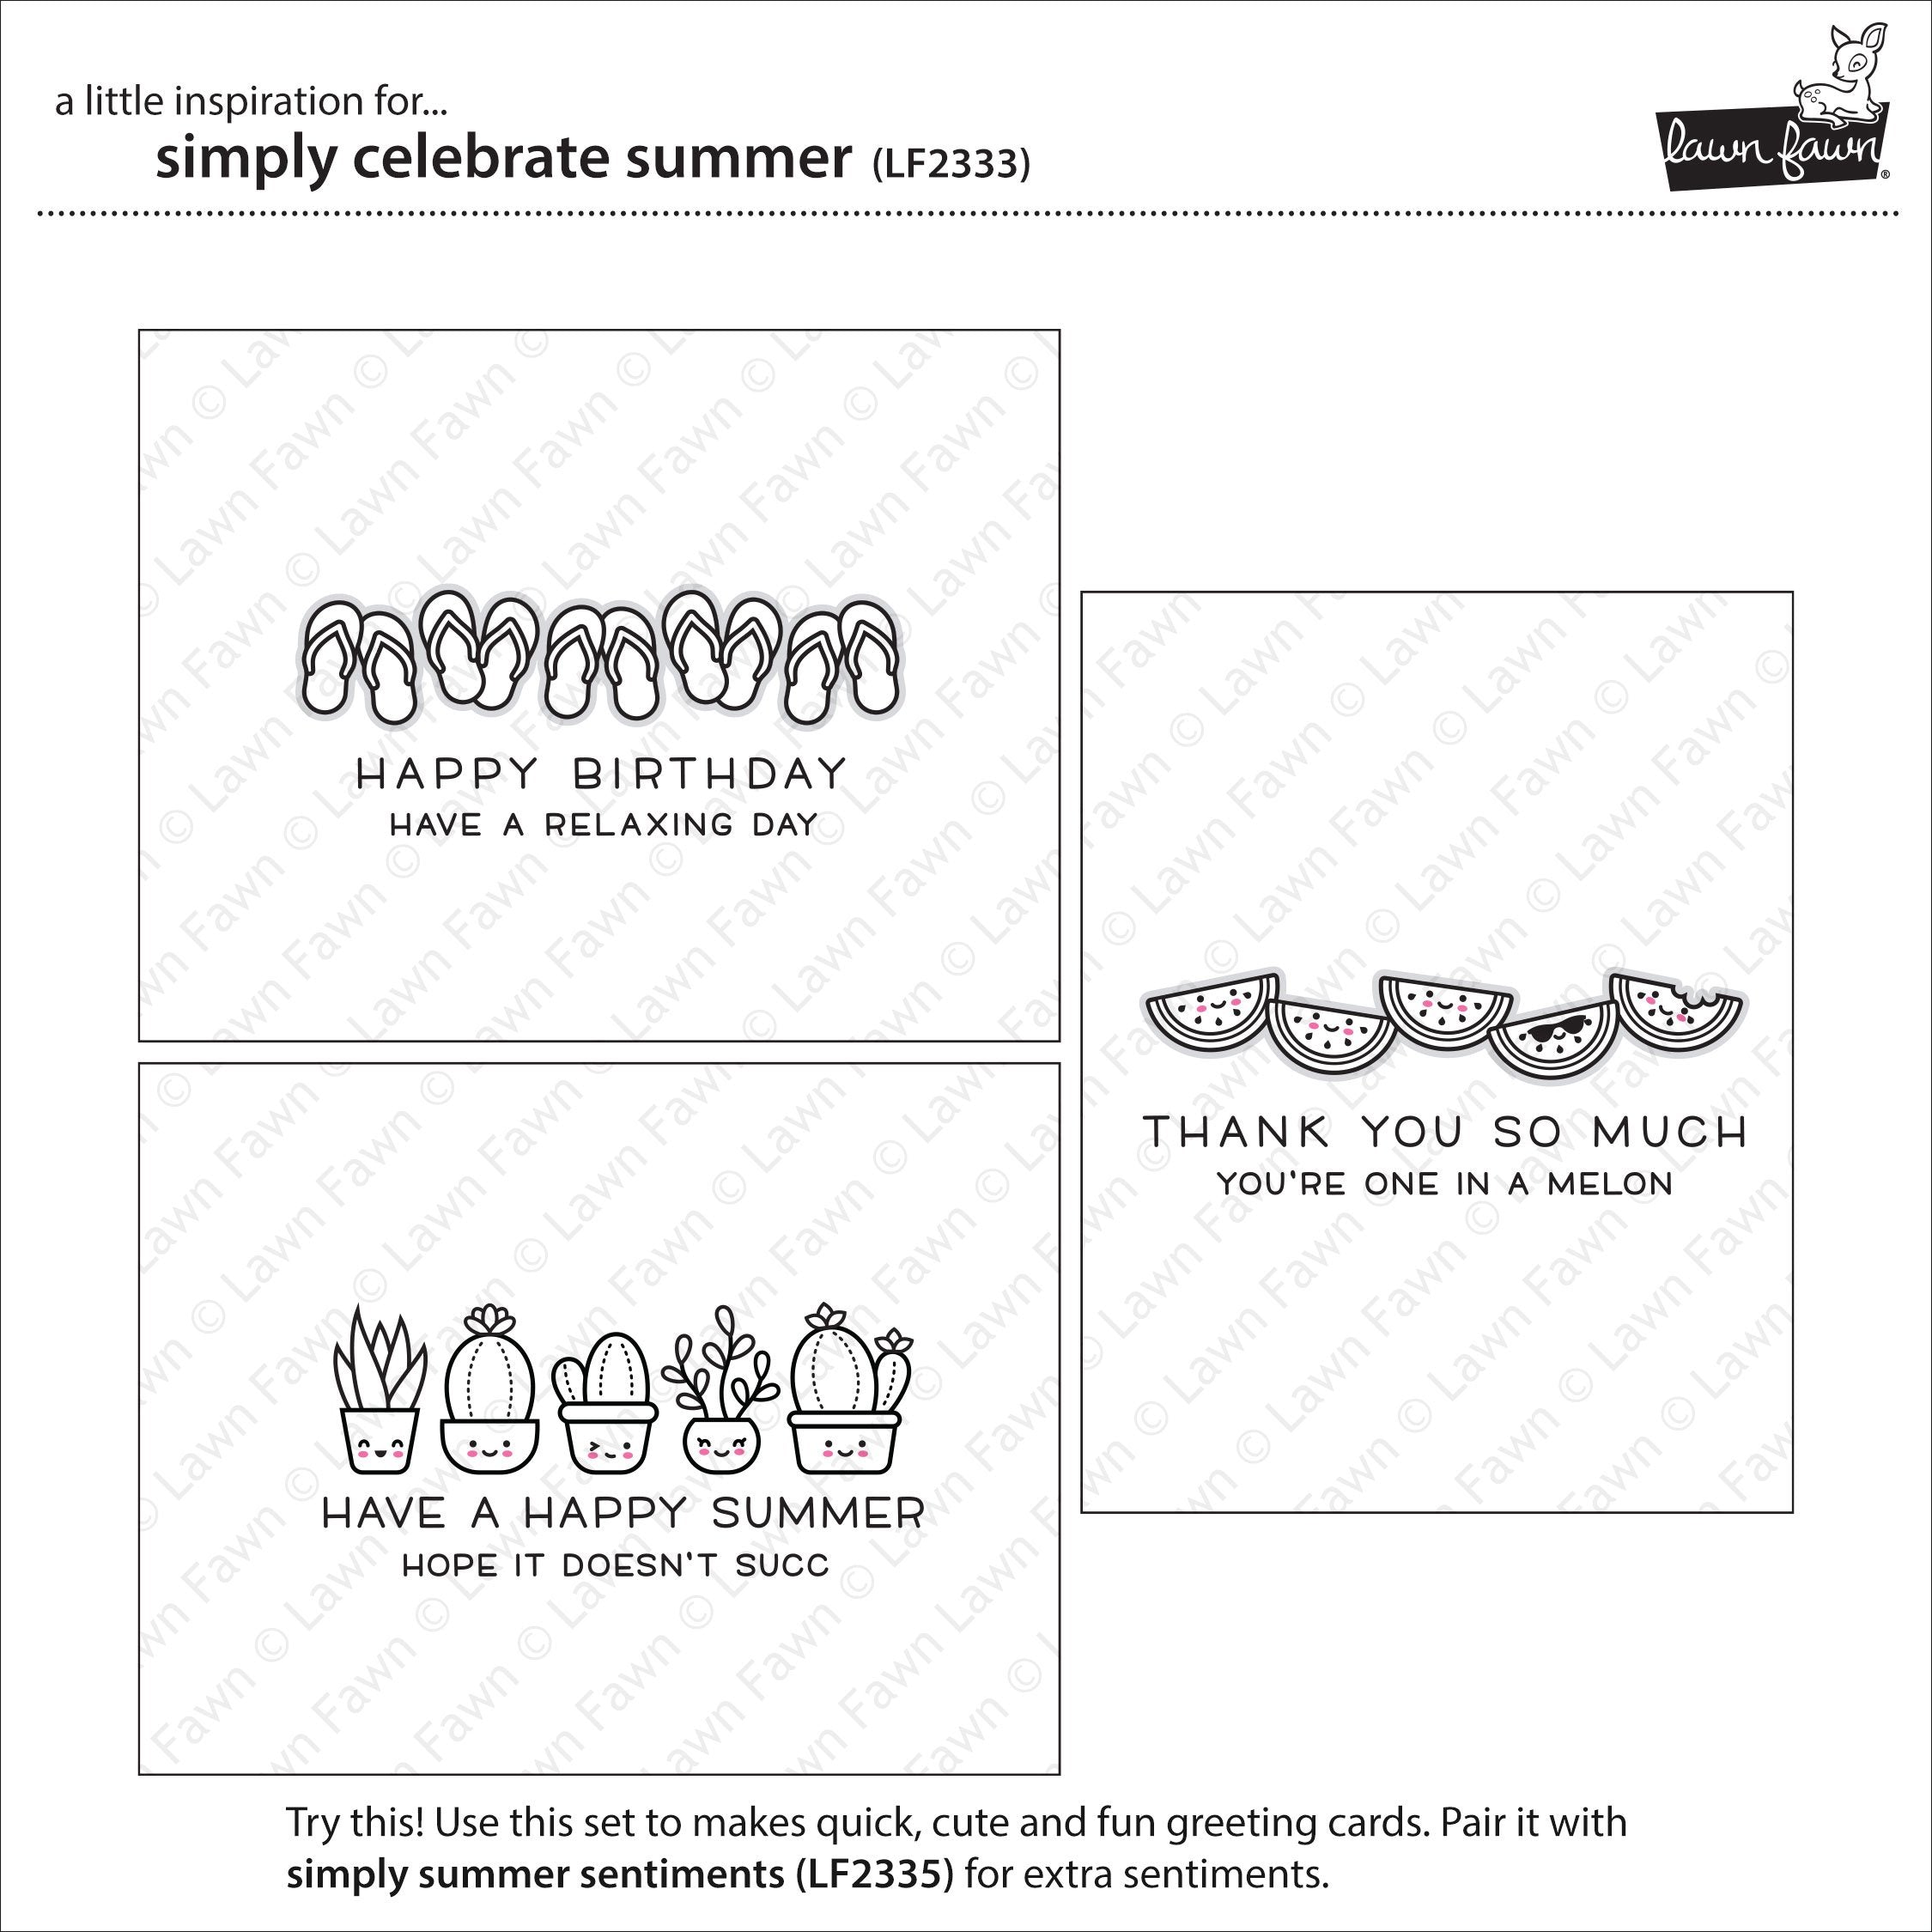 LAWN FAWN: Simply Celebrate Summer